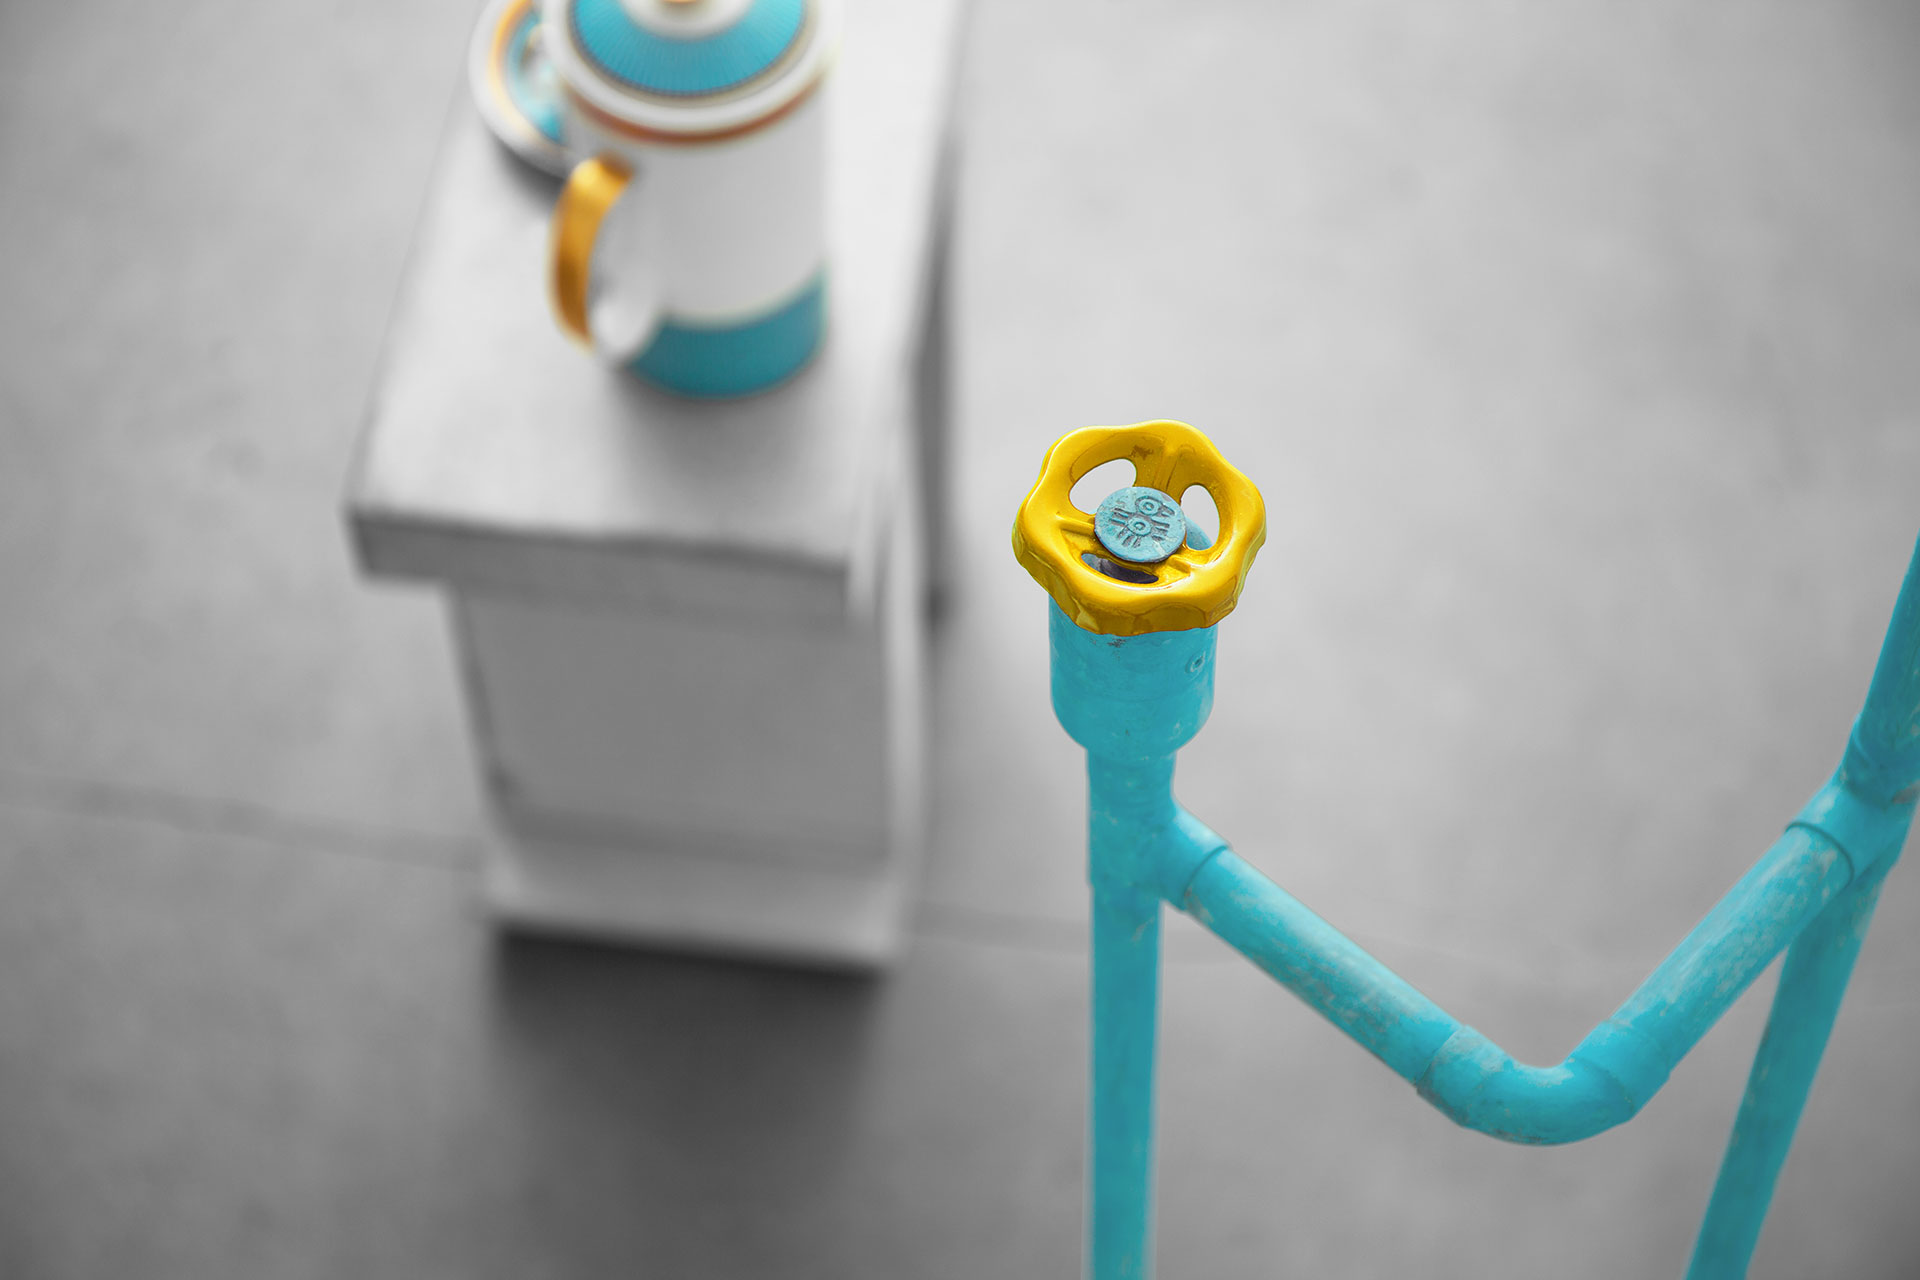 Cool yellow knob dimmer in trendy turquoise floor lamp inspired by industrial style design